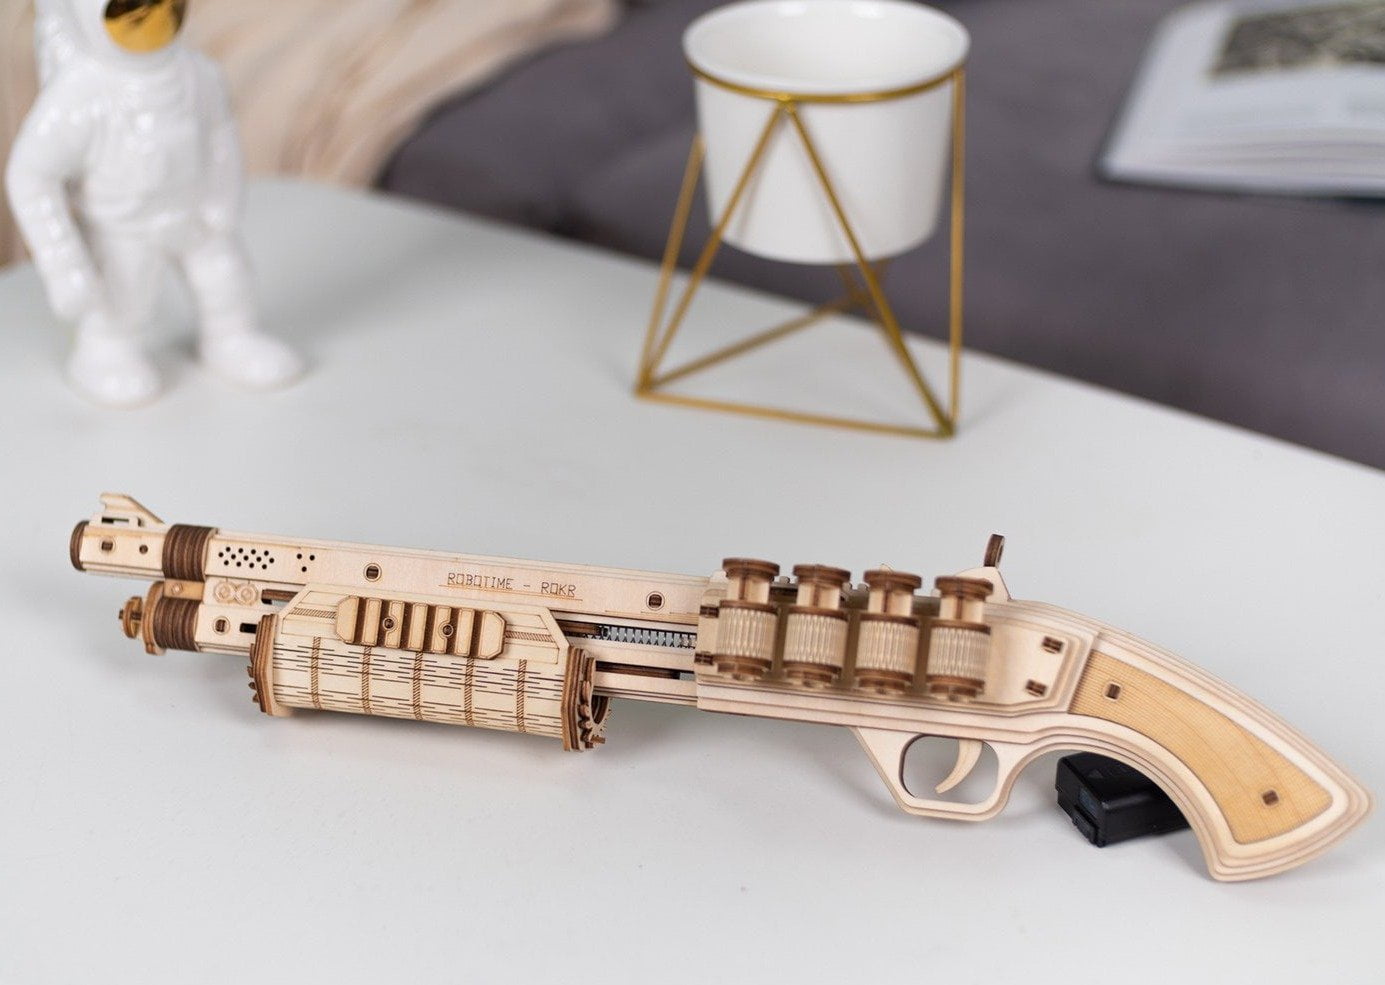 2 Wooden Classic Repeater Rubber Band Gun Toy for sale online 